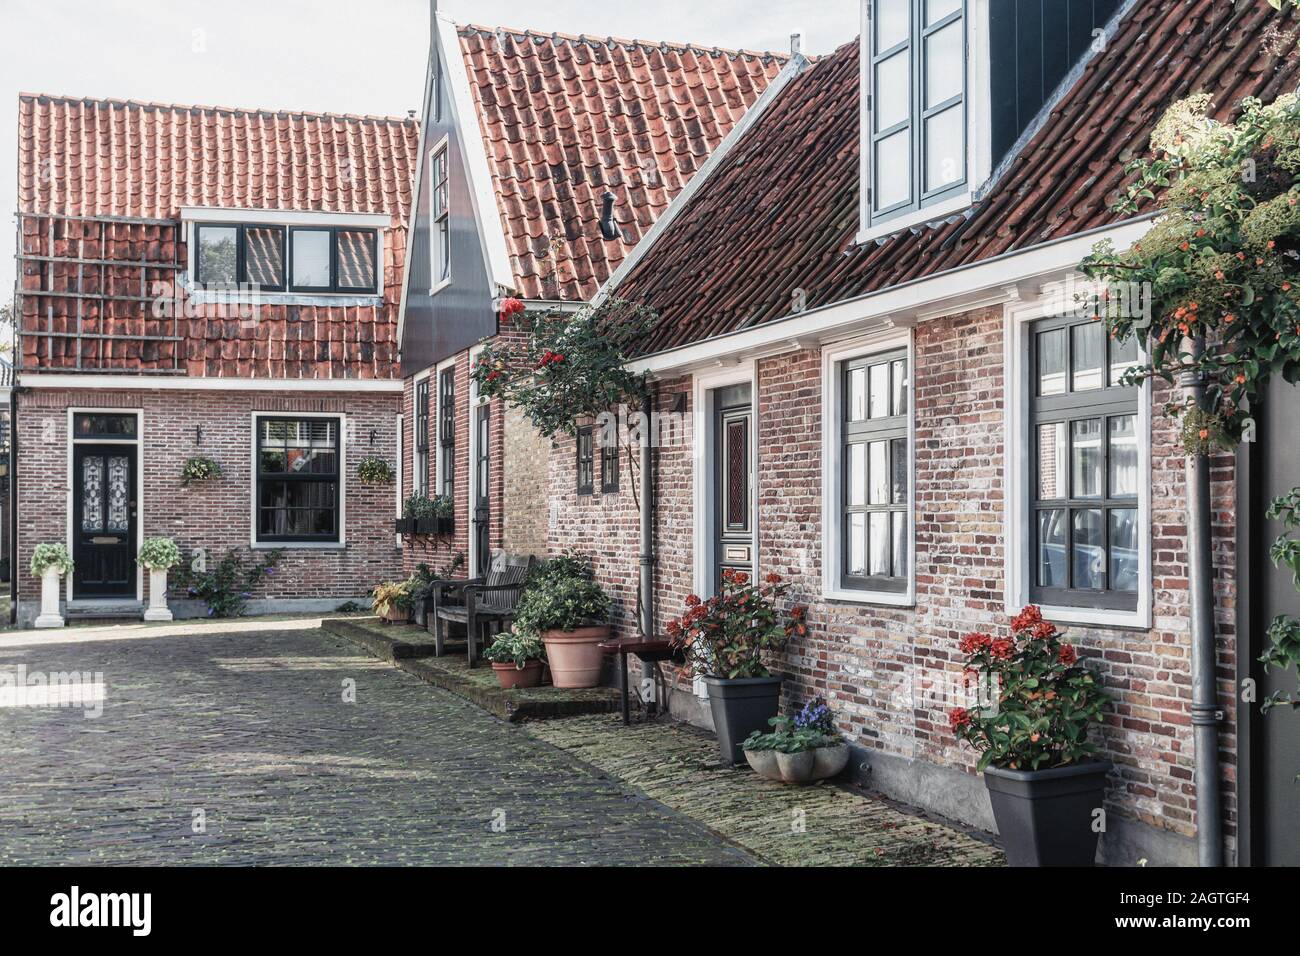 Impression of the Graaf Willemstraat in the old center of Edam in The Netherlands Stock Photo